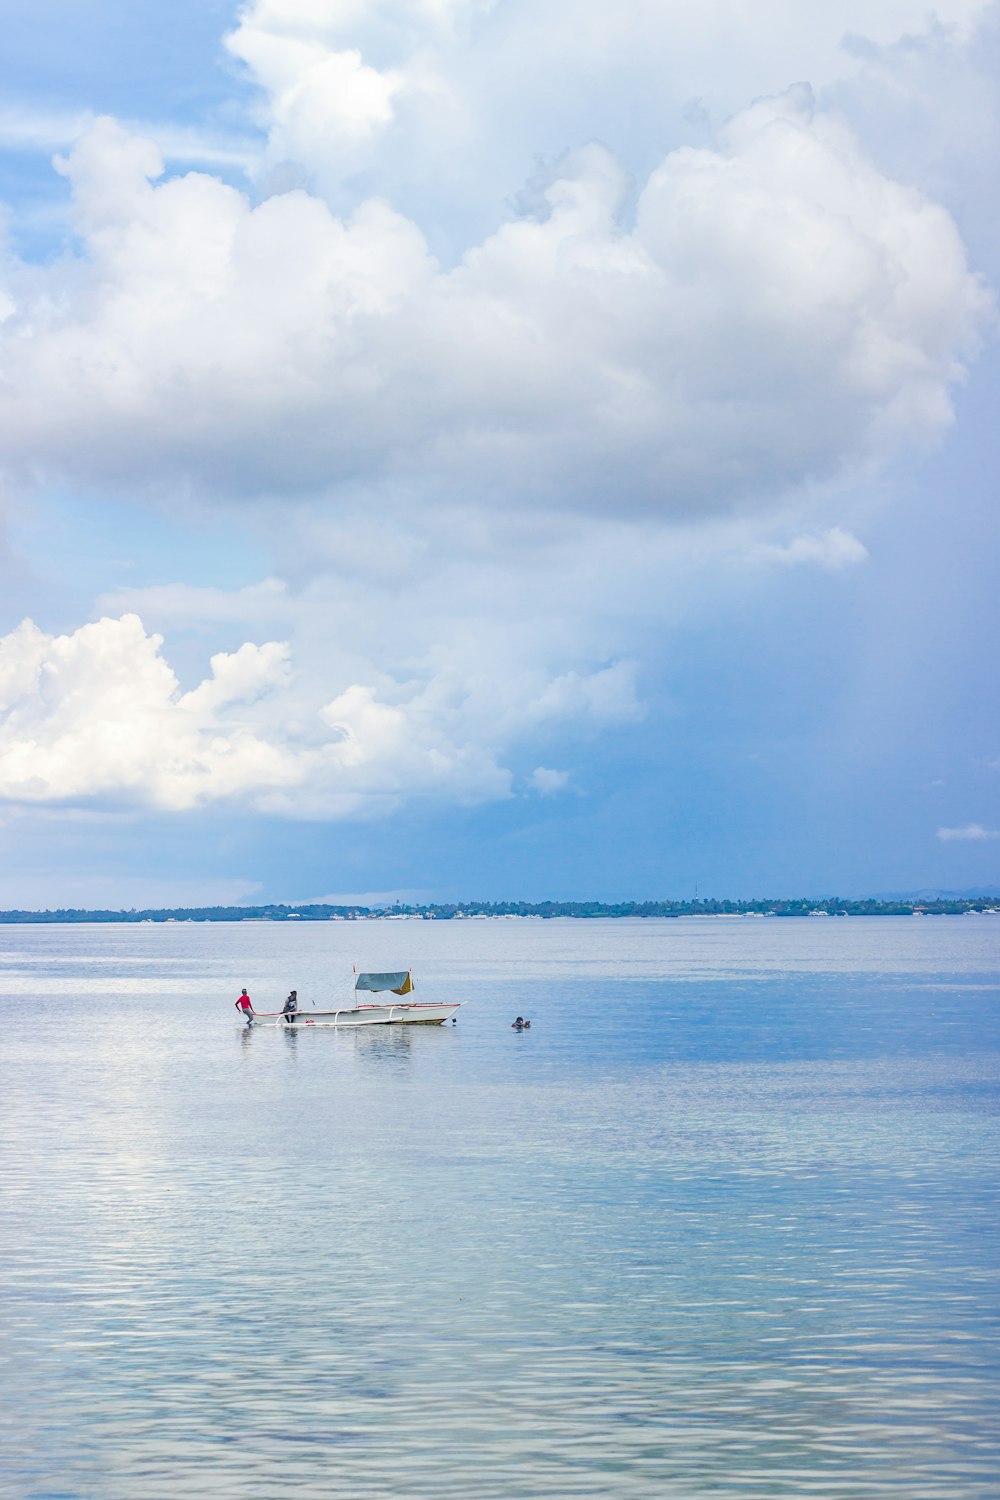 people on white boat on sea under blue sky and white clouds during daytime